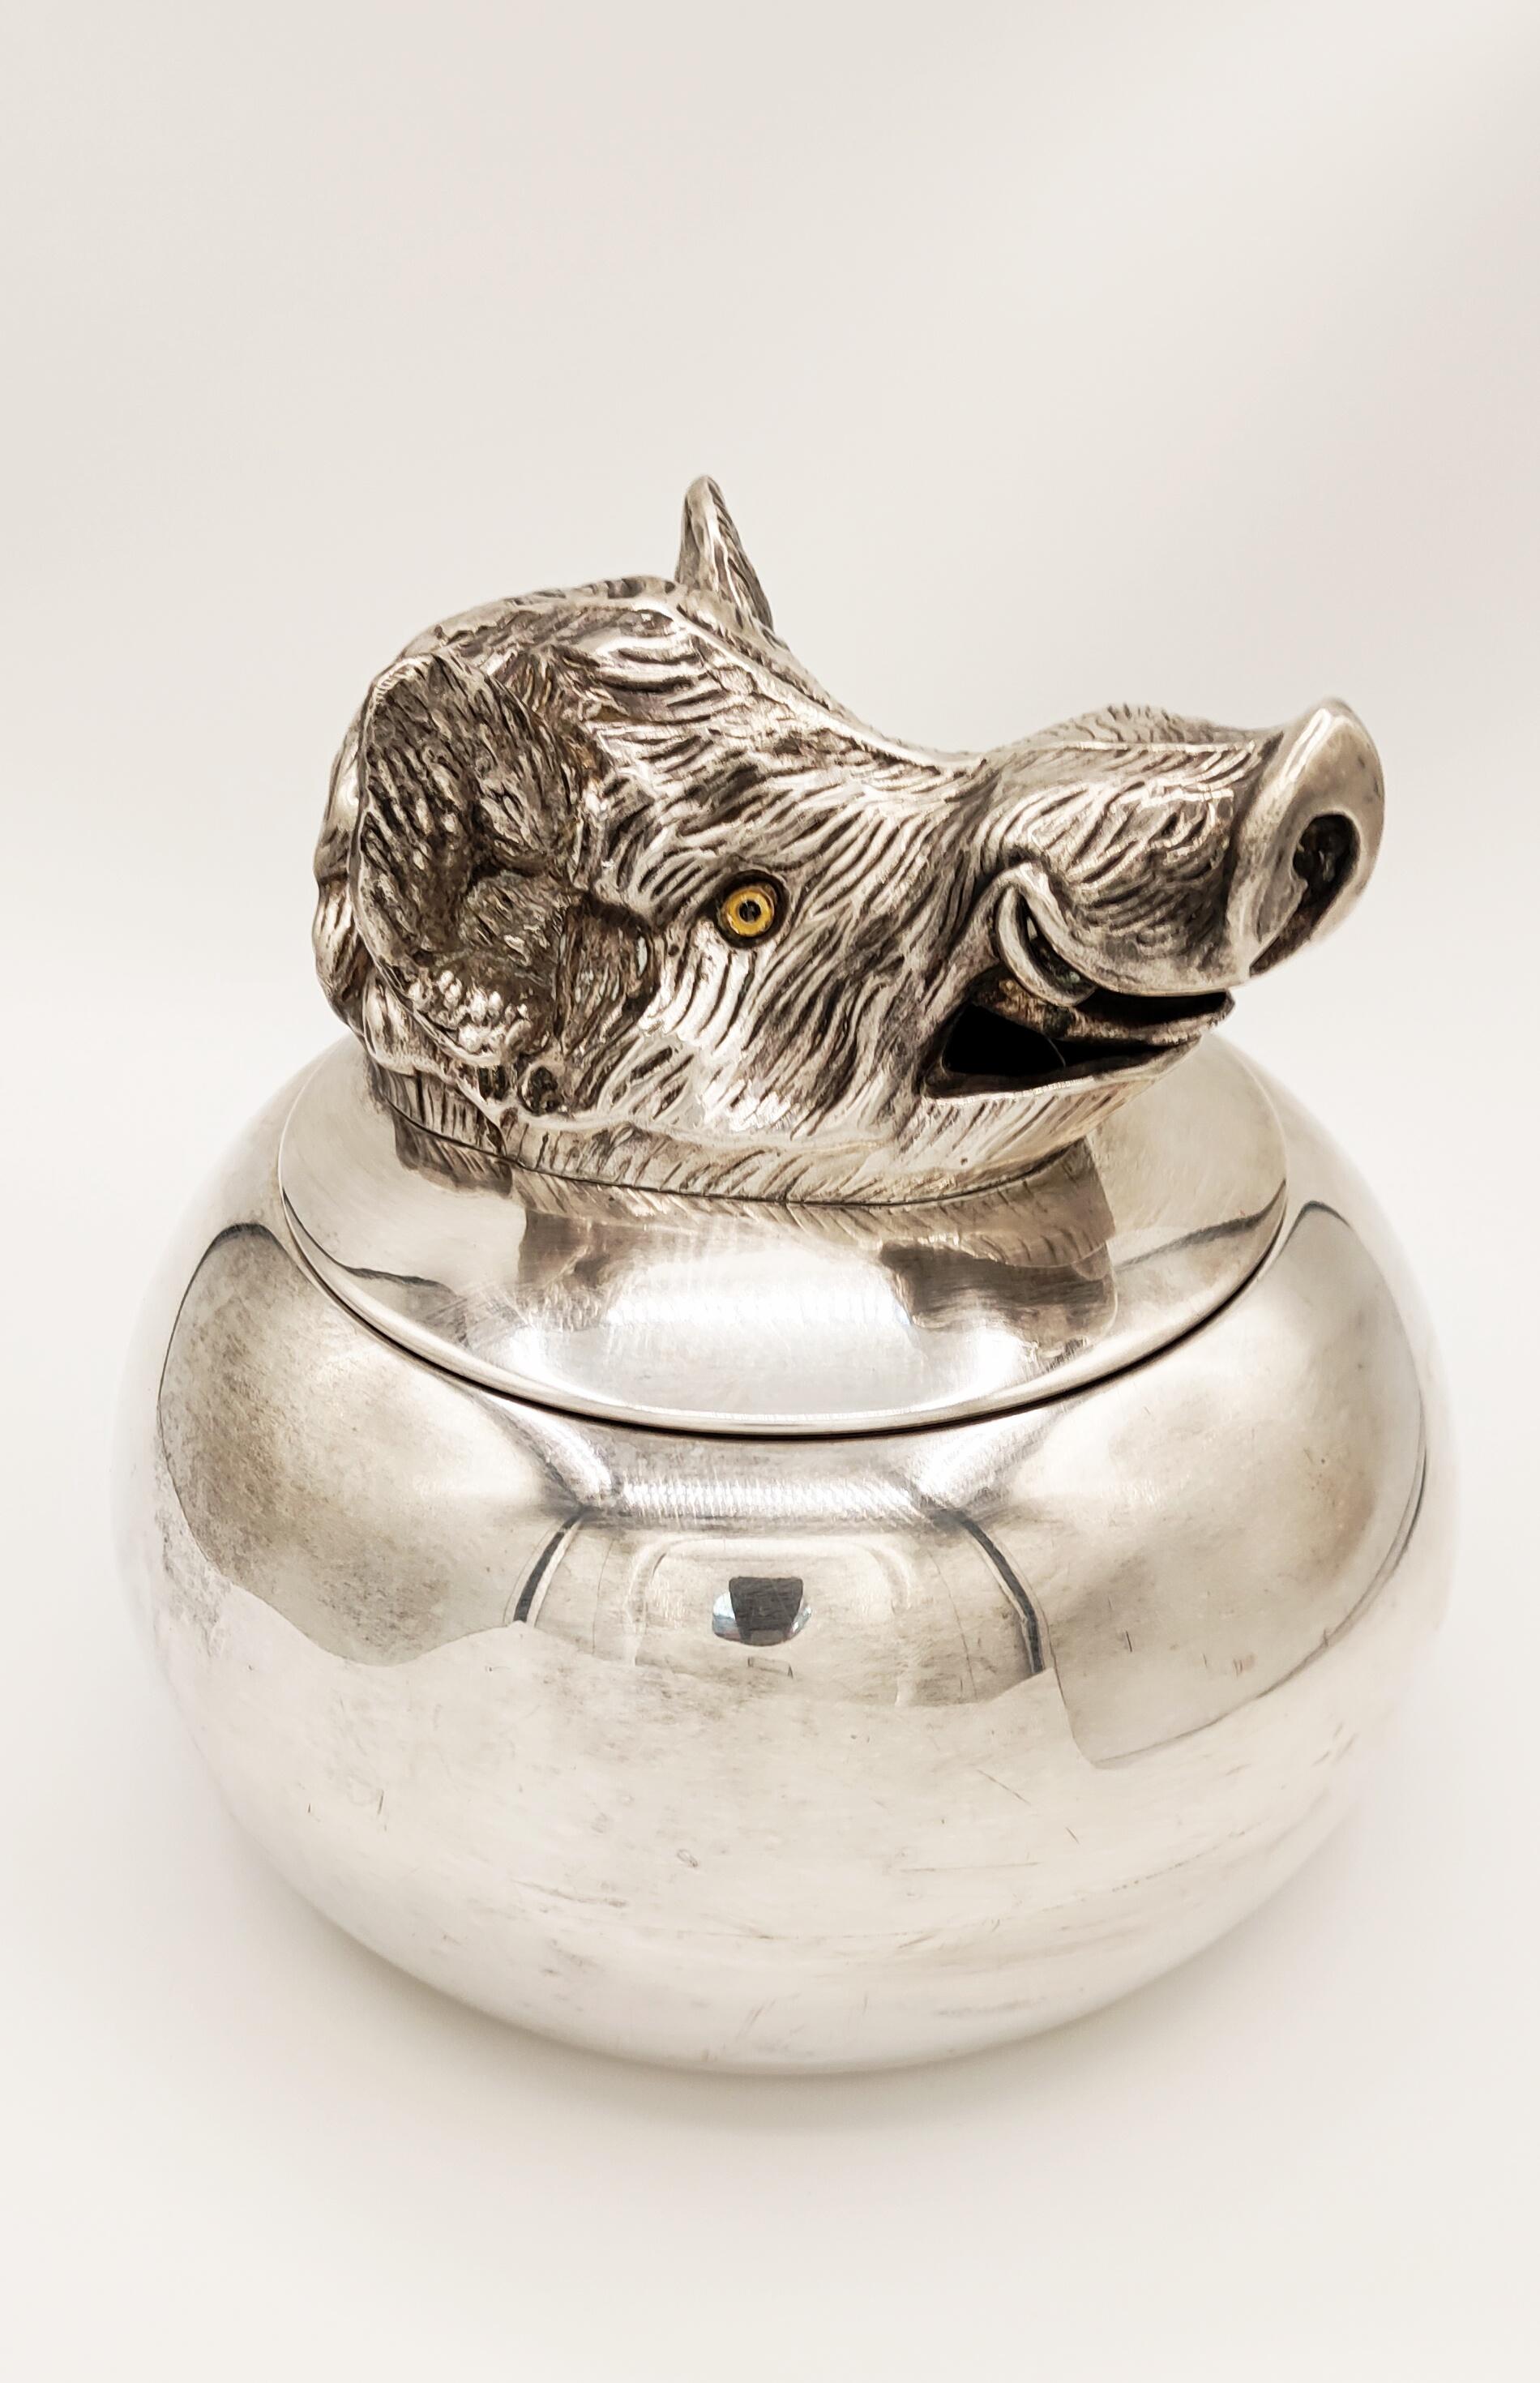 Spanish Rare Boar Silver Plated Ice Bucket by Valenti, Spain, 1970s